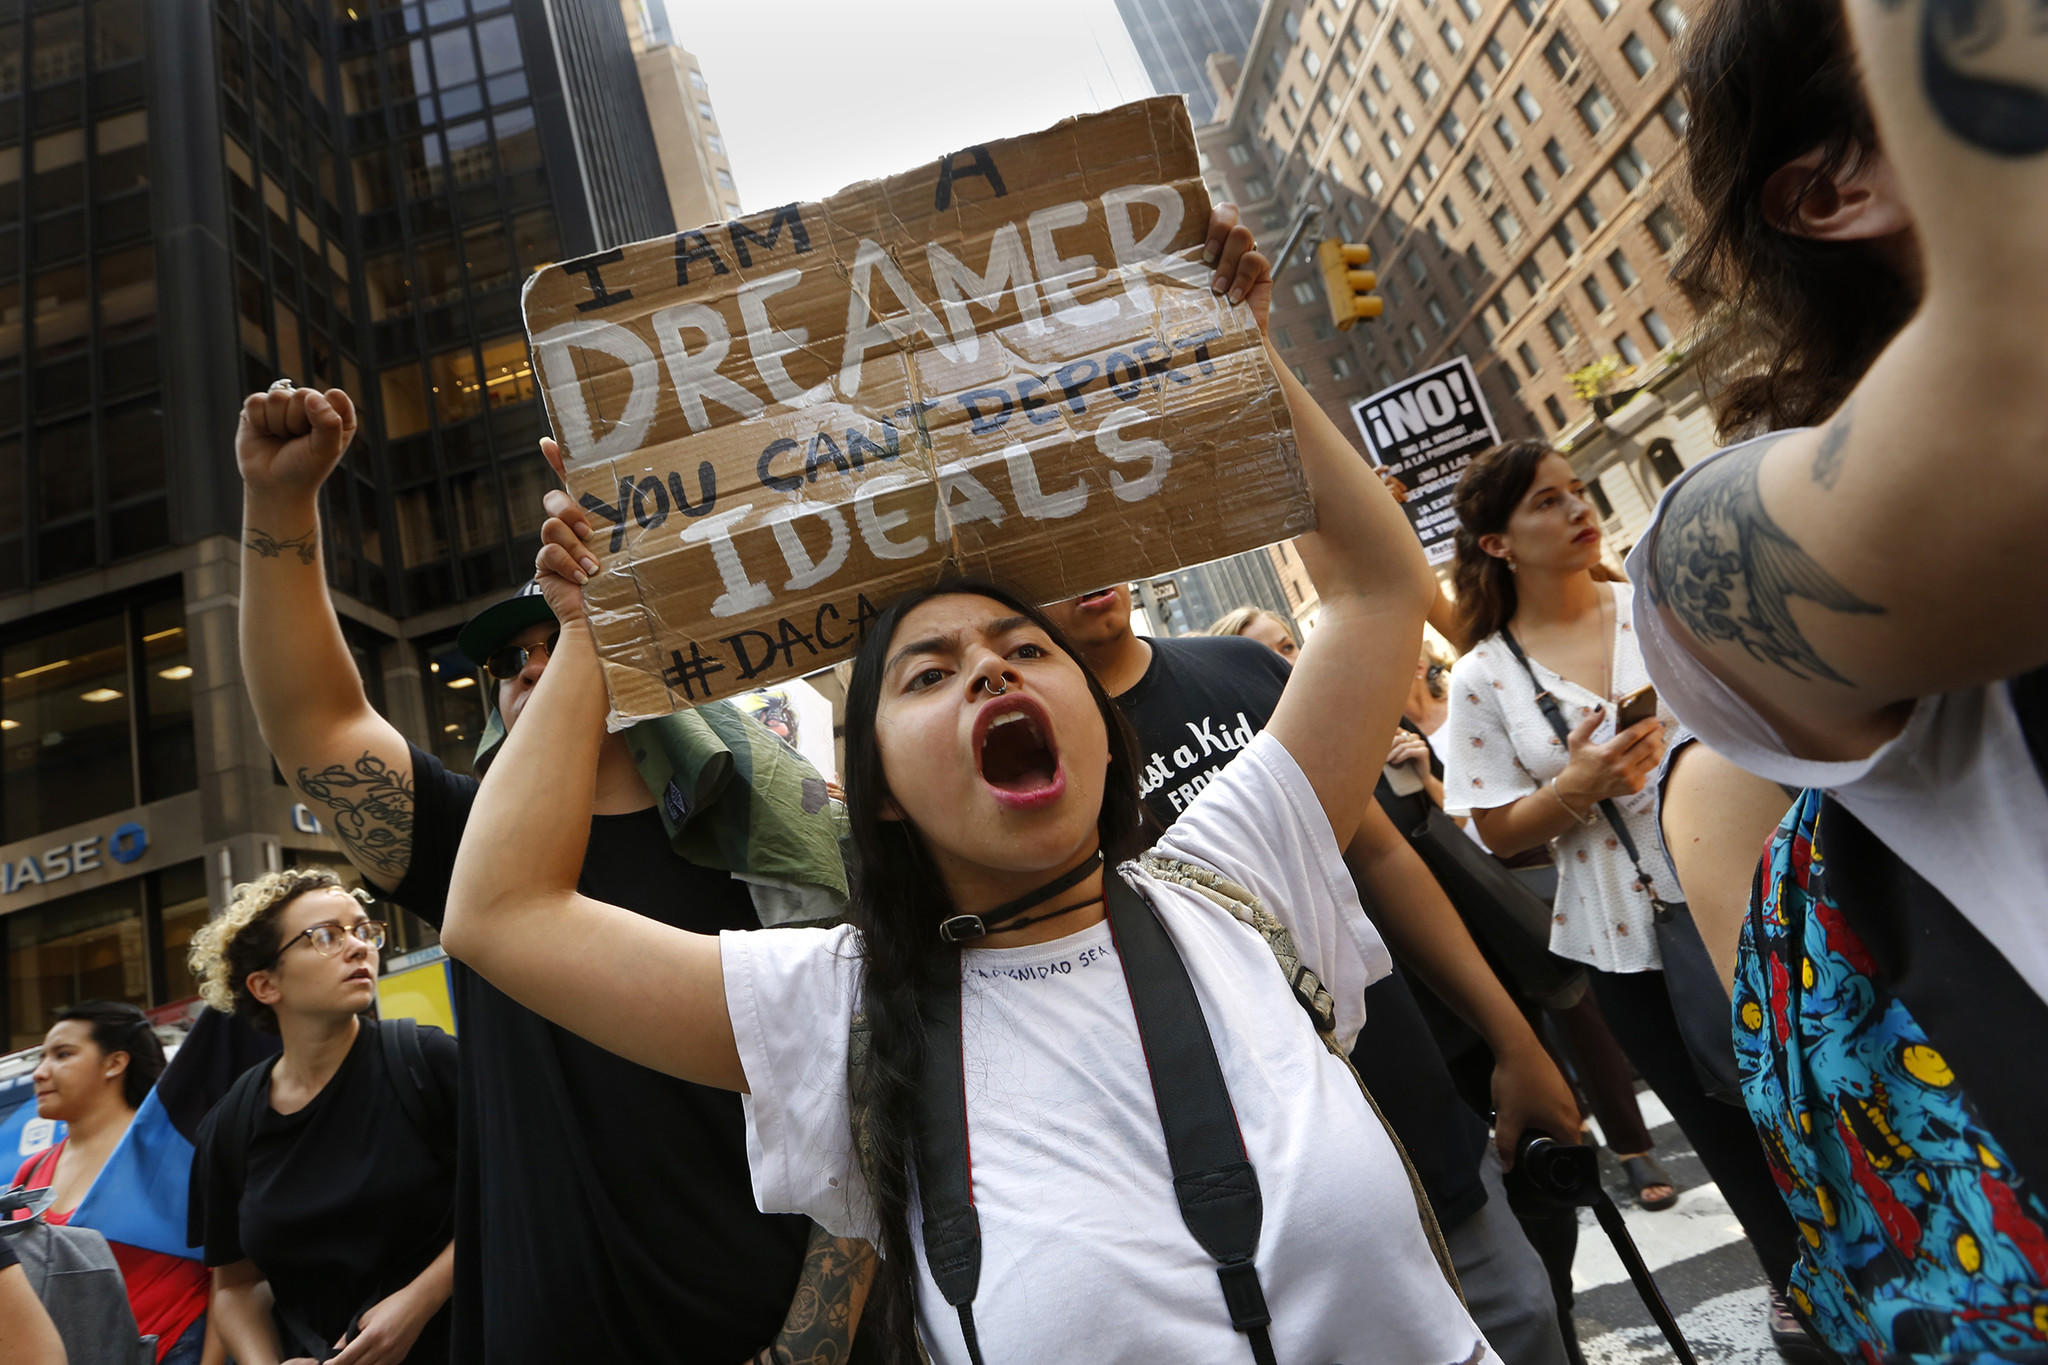 Protesters, including Dreamer Gloria Mendoza, gather at Trump Tower in New York to protest the announcement that President Trump will end the Deferred Action for Childhood Arrivals program. (Carolyn Cole / Los Angeles Times)